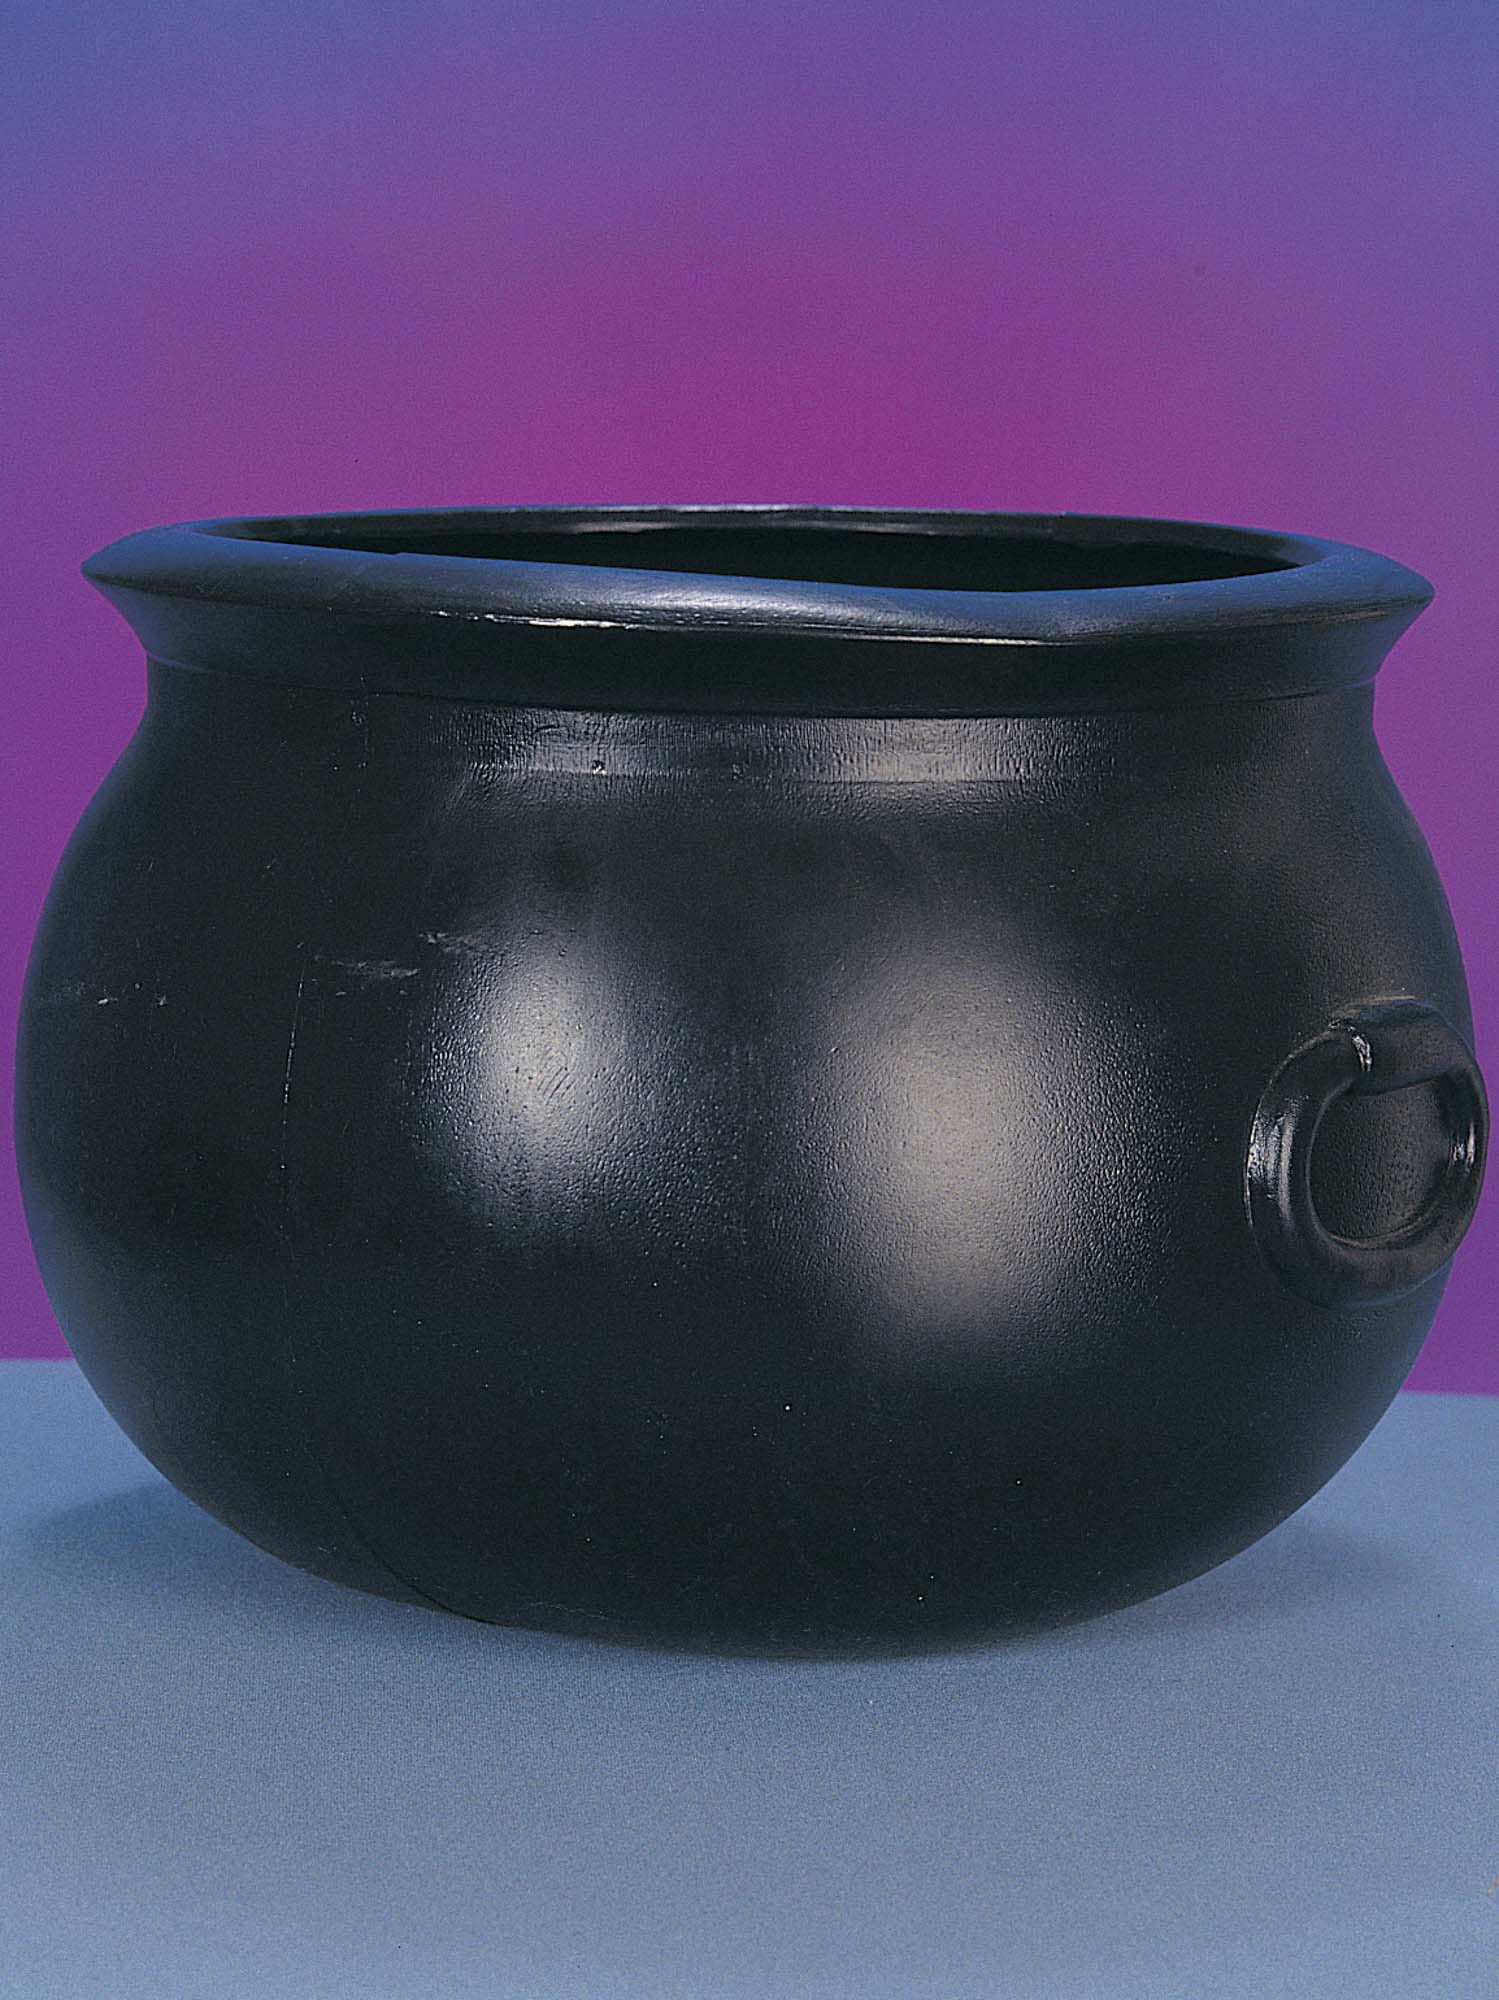 12-inch Black Witch Cauldron Candy Bucket - costumes.com